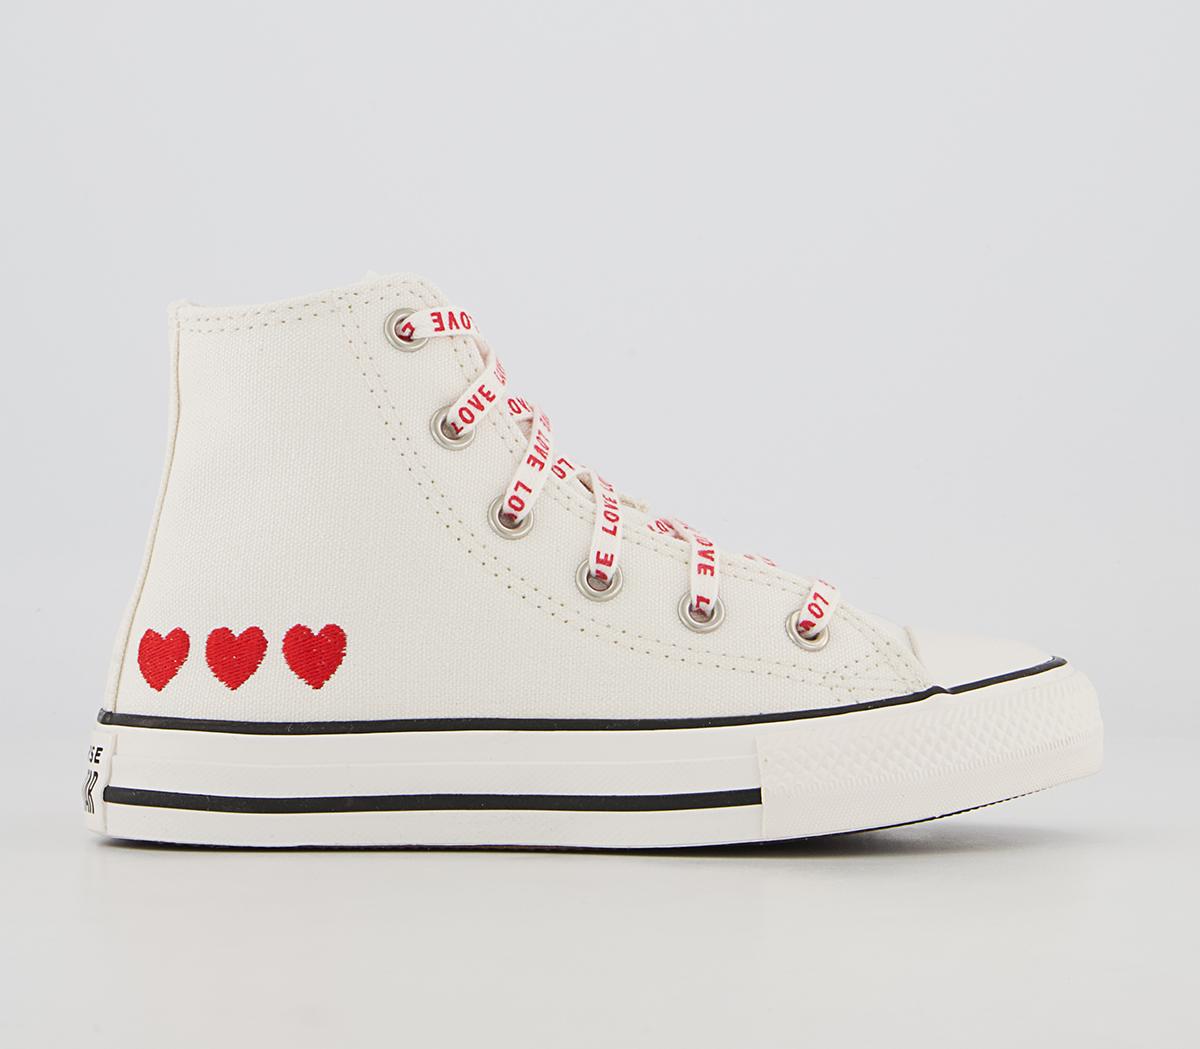 Converse All Star Hi Youth Trainers Vintage White University Red Black Heart  - Unisex